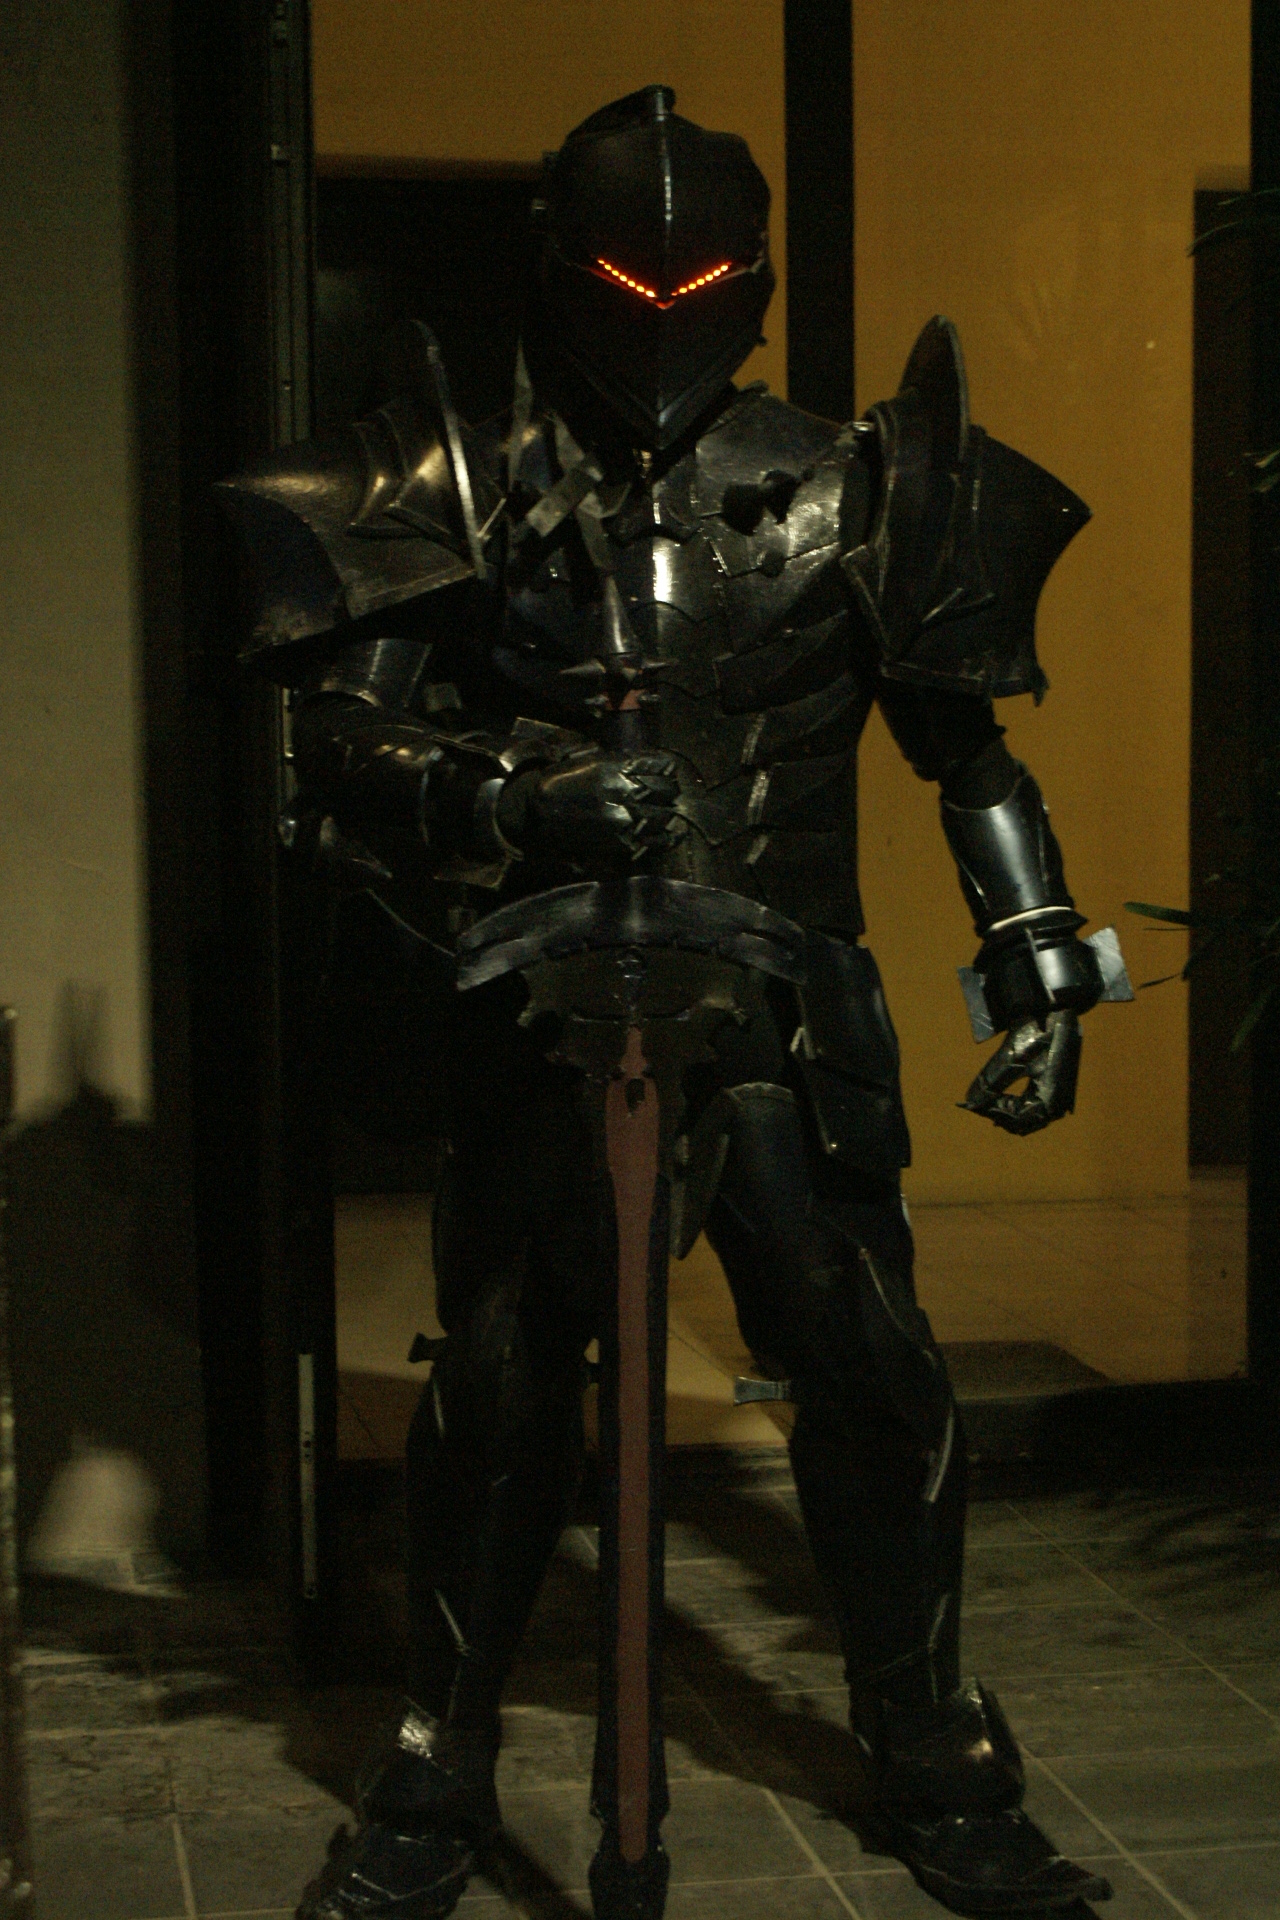 A dark, sharp-edged suit of armor with a sword and red lights for eyes.